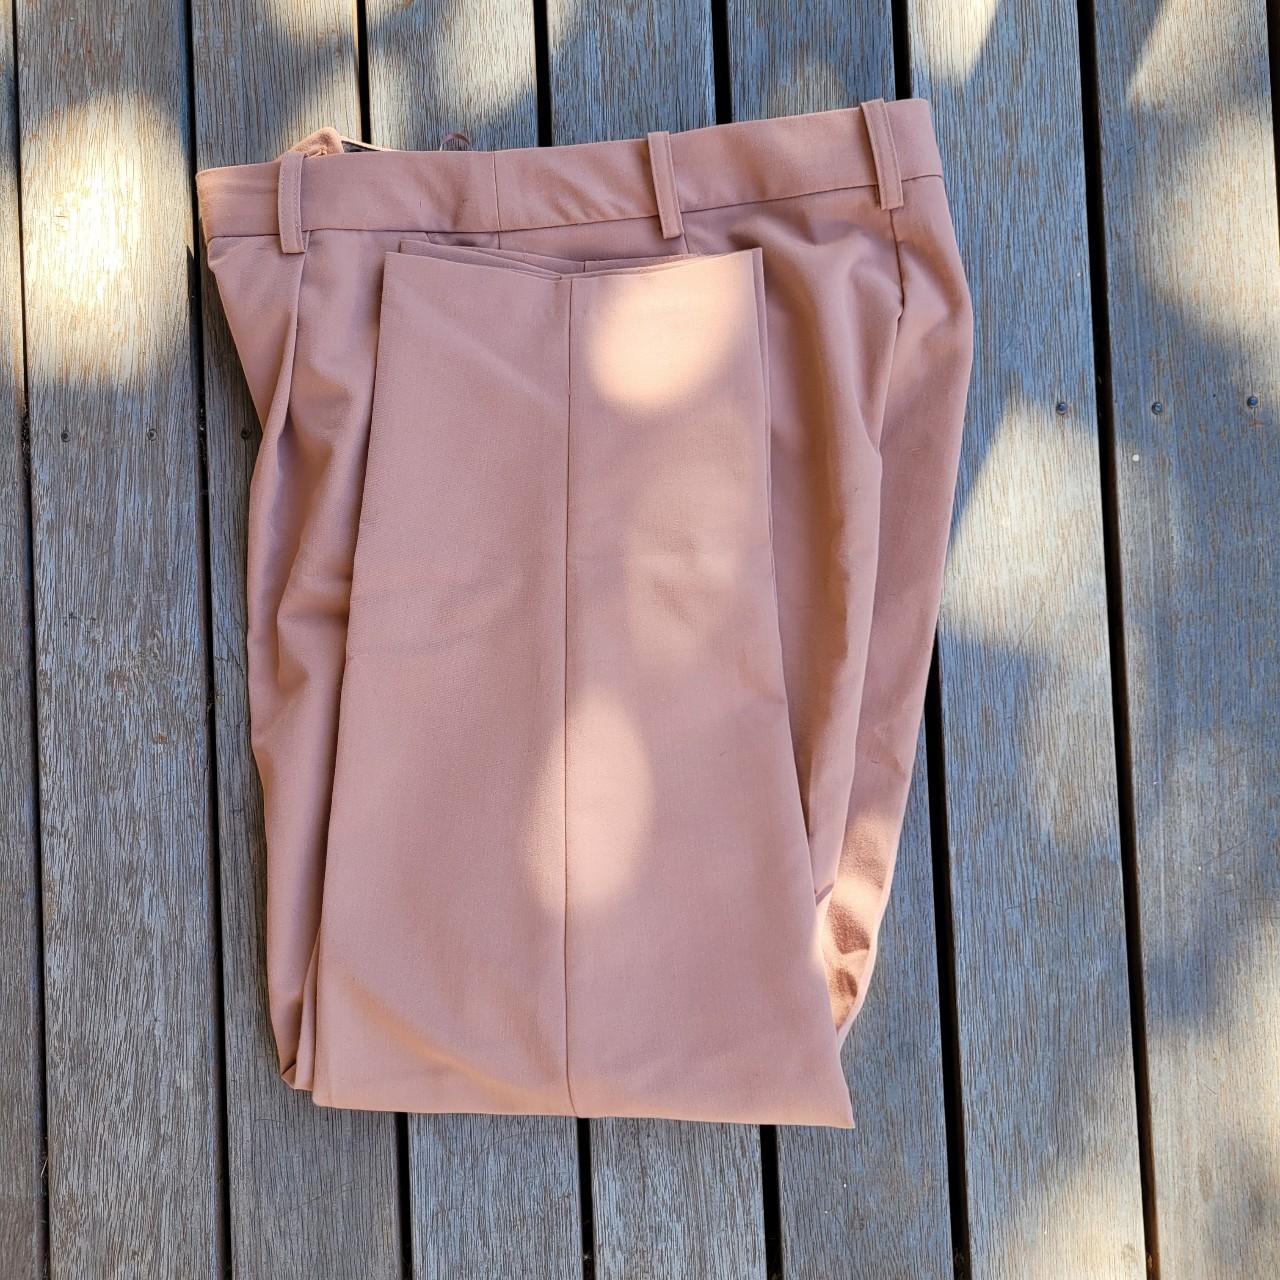 Dusty pink tailored work pants size 12 - Depop